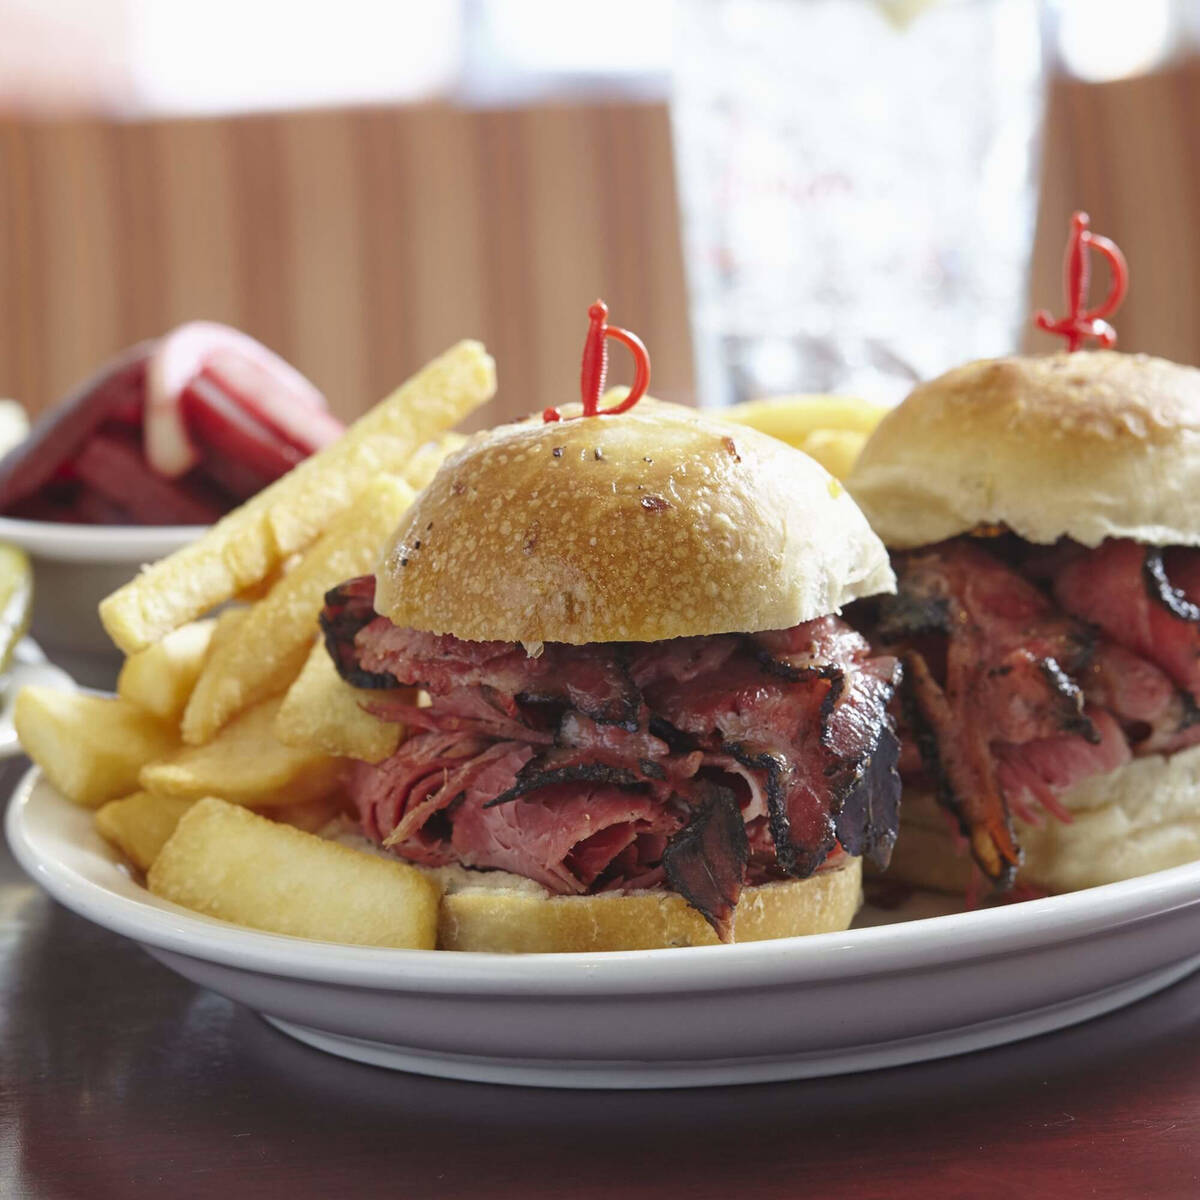 Corned beef and pastrami sandwiches from Junior's, the New York City restaurant and baker famed ...